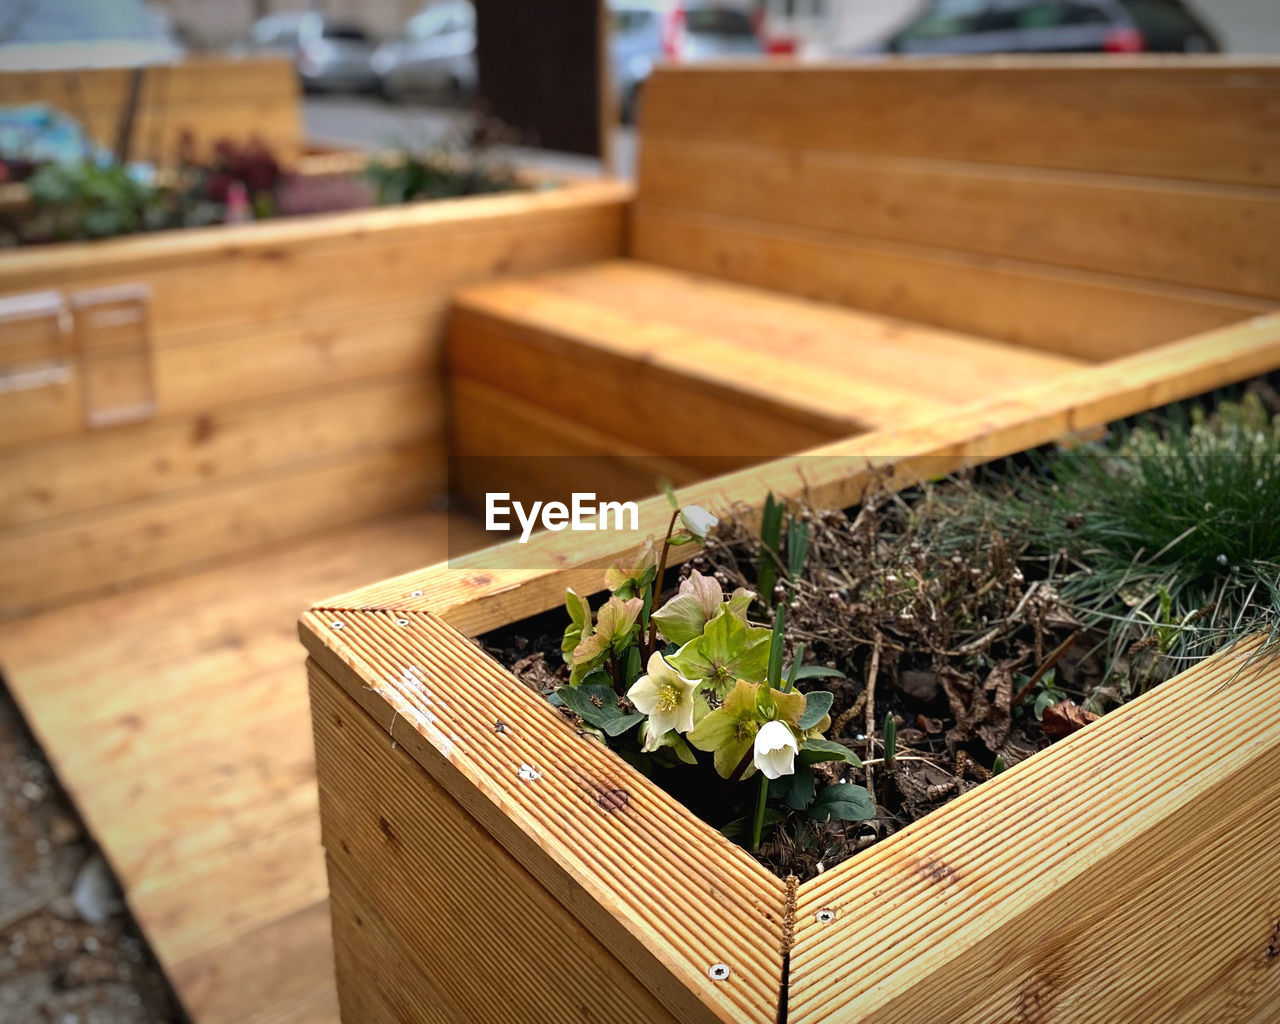 plant, wood, nature, box, growth, no people, focus on foreground, crate, day, container, freshness, potted plant, outdoors, flower, food and drink, beauty in nature, close-up, architecture, garden, backyard, food